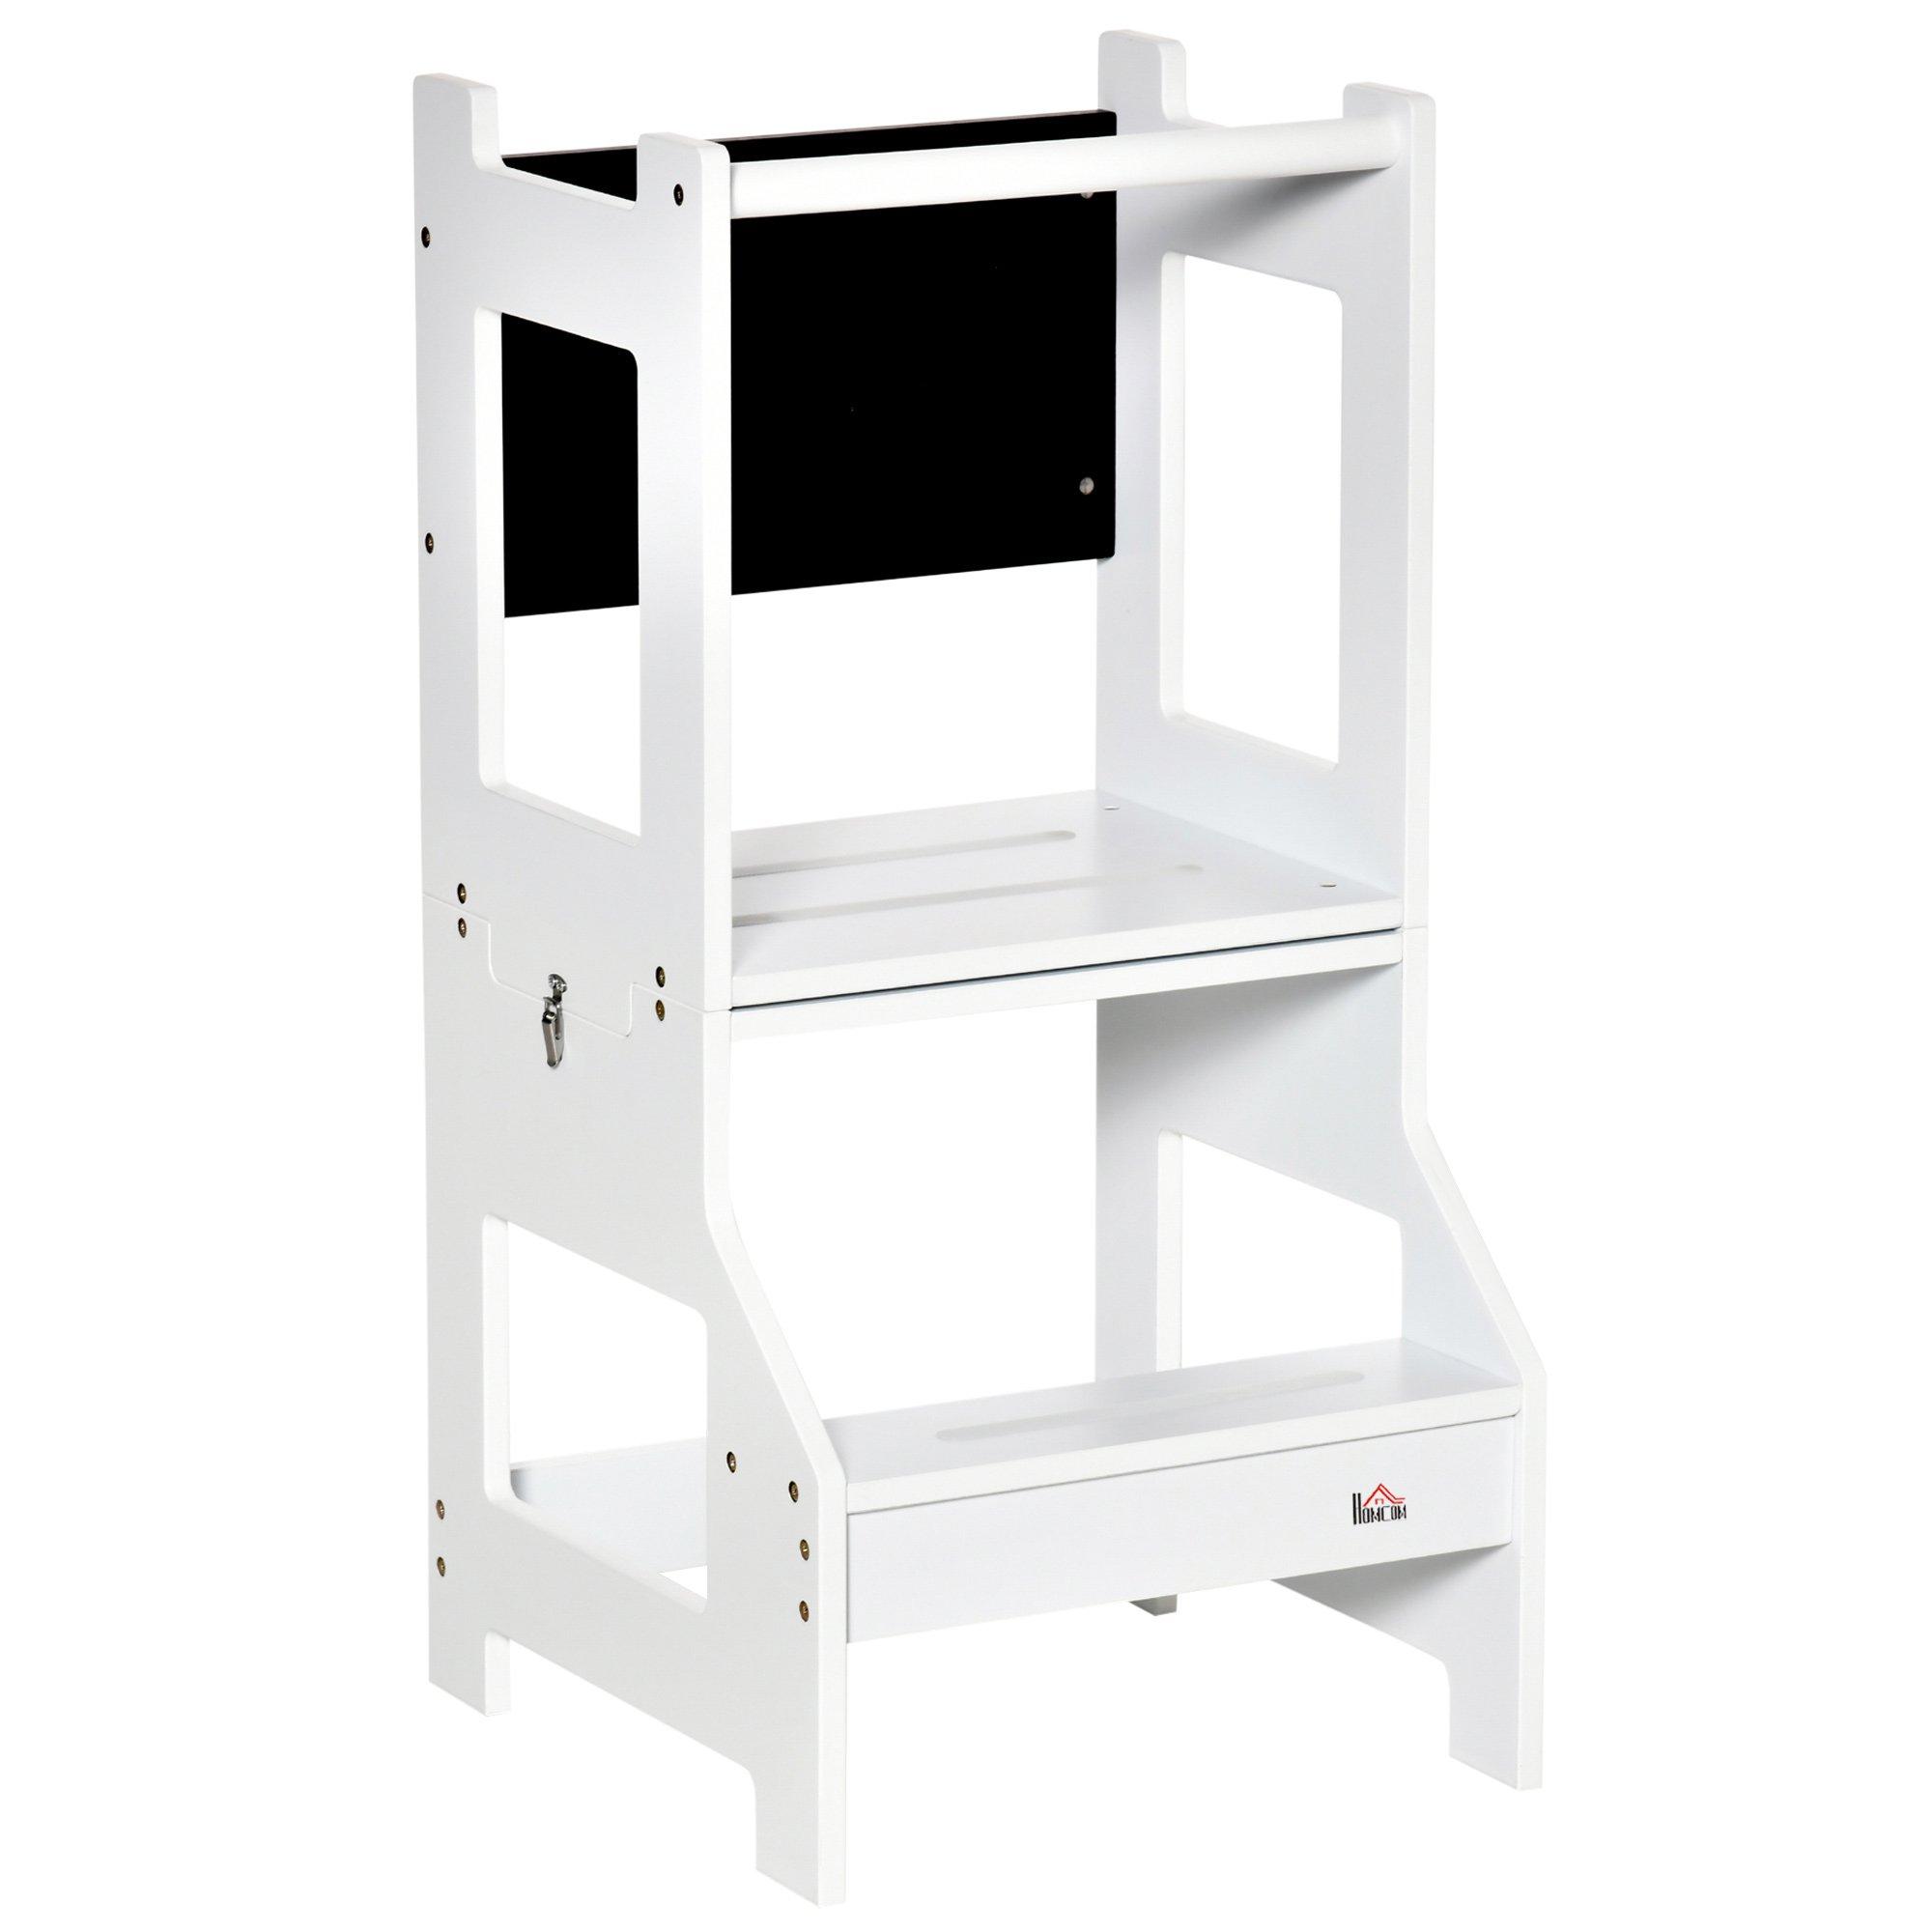 2-in-1 Kids Kitchen Step Stool Table Chair Set W/ Safety Rail Chalkboard, White